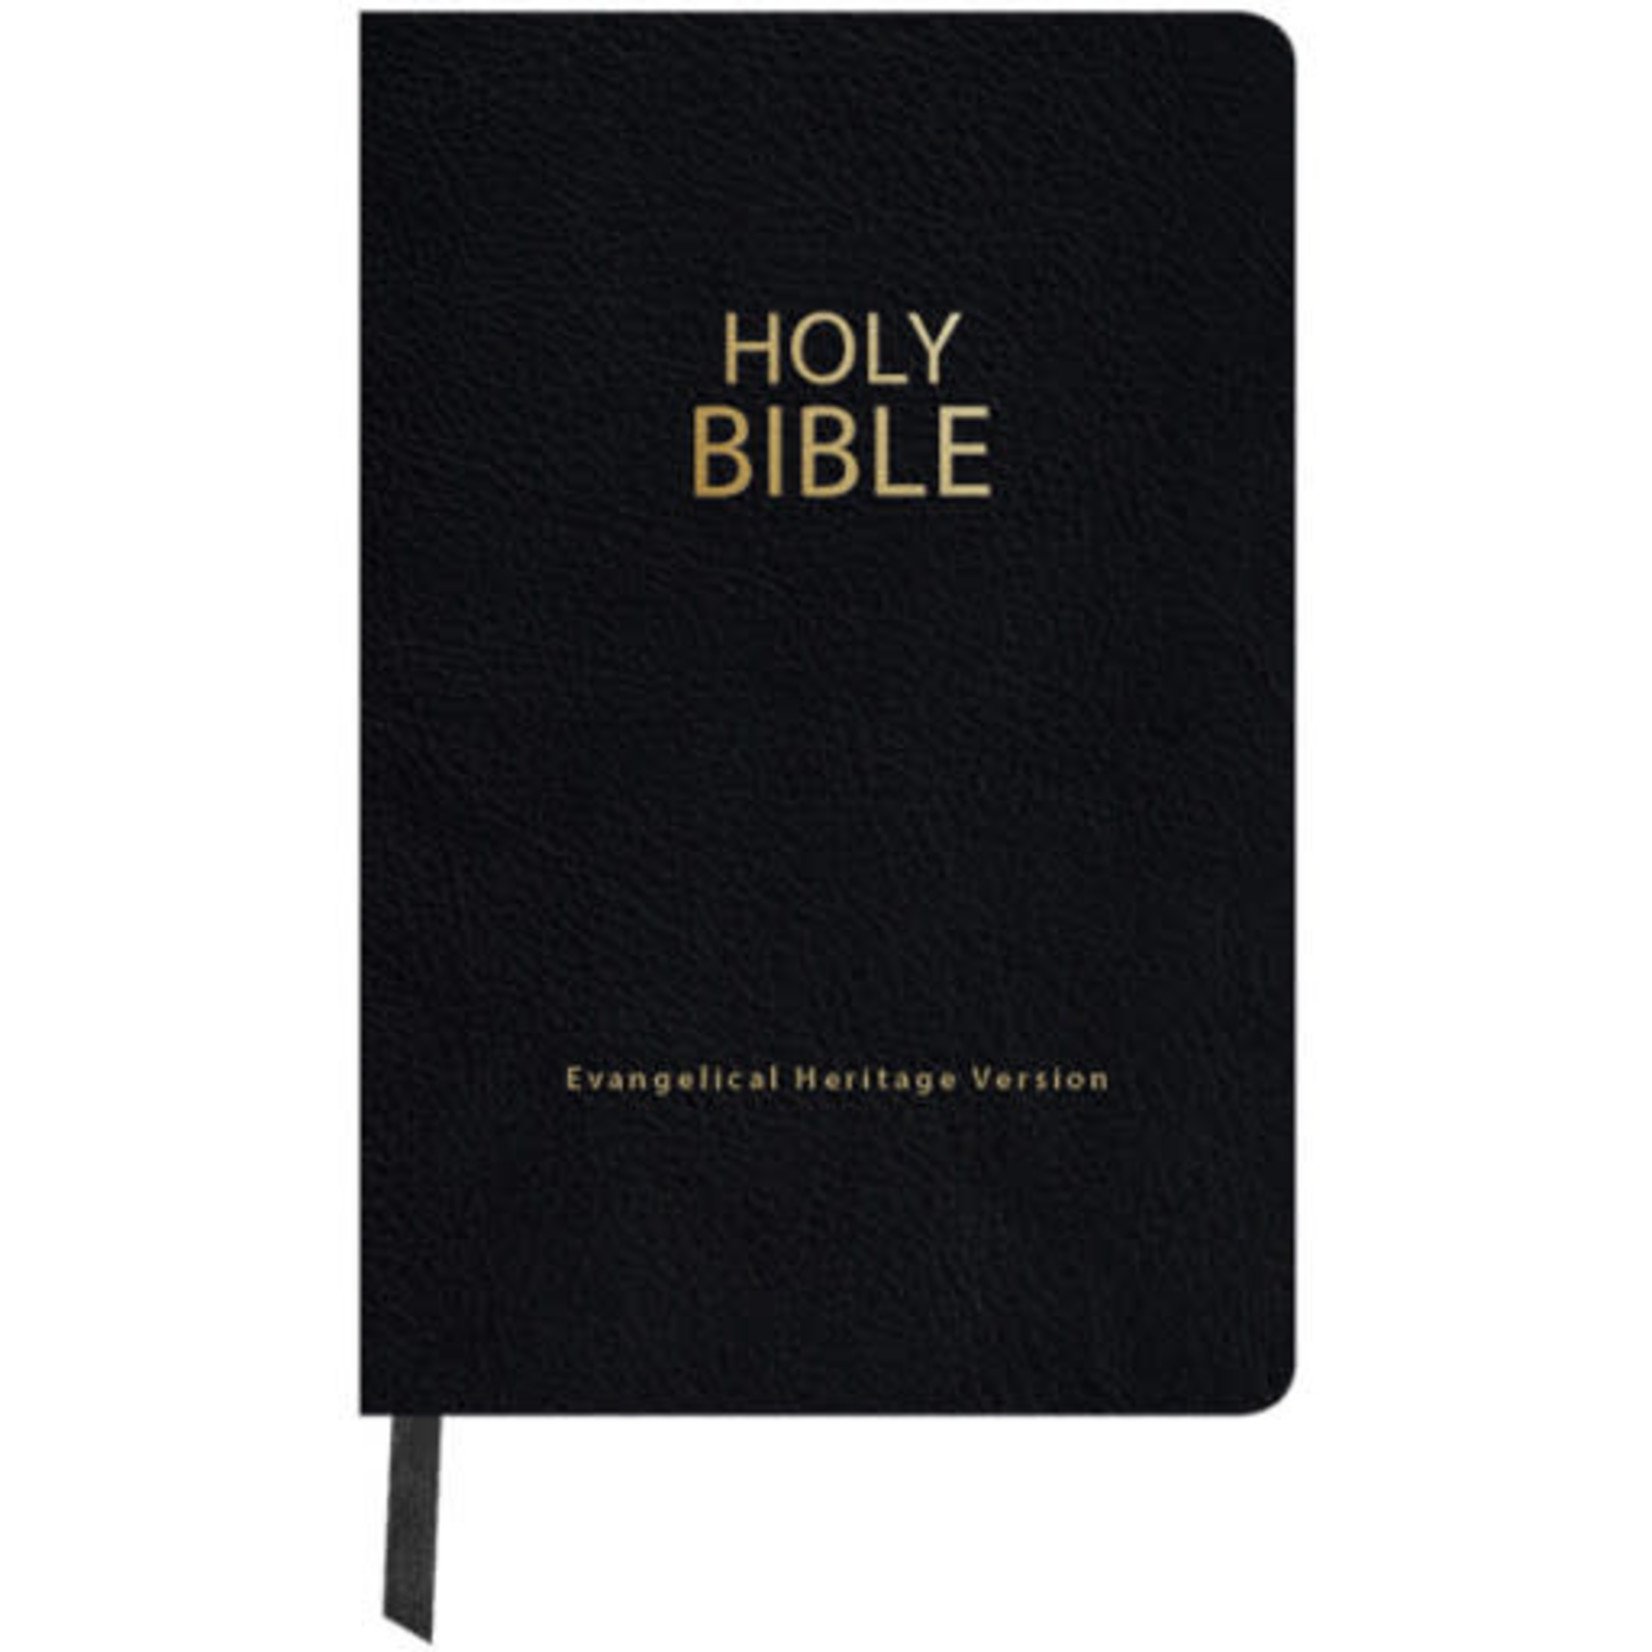 Holy Bible (EHV) Evangelical Heritage Version Deluxe Gift Edition